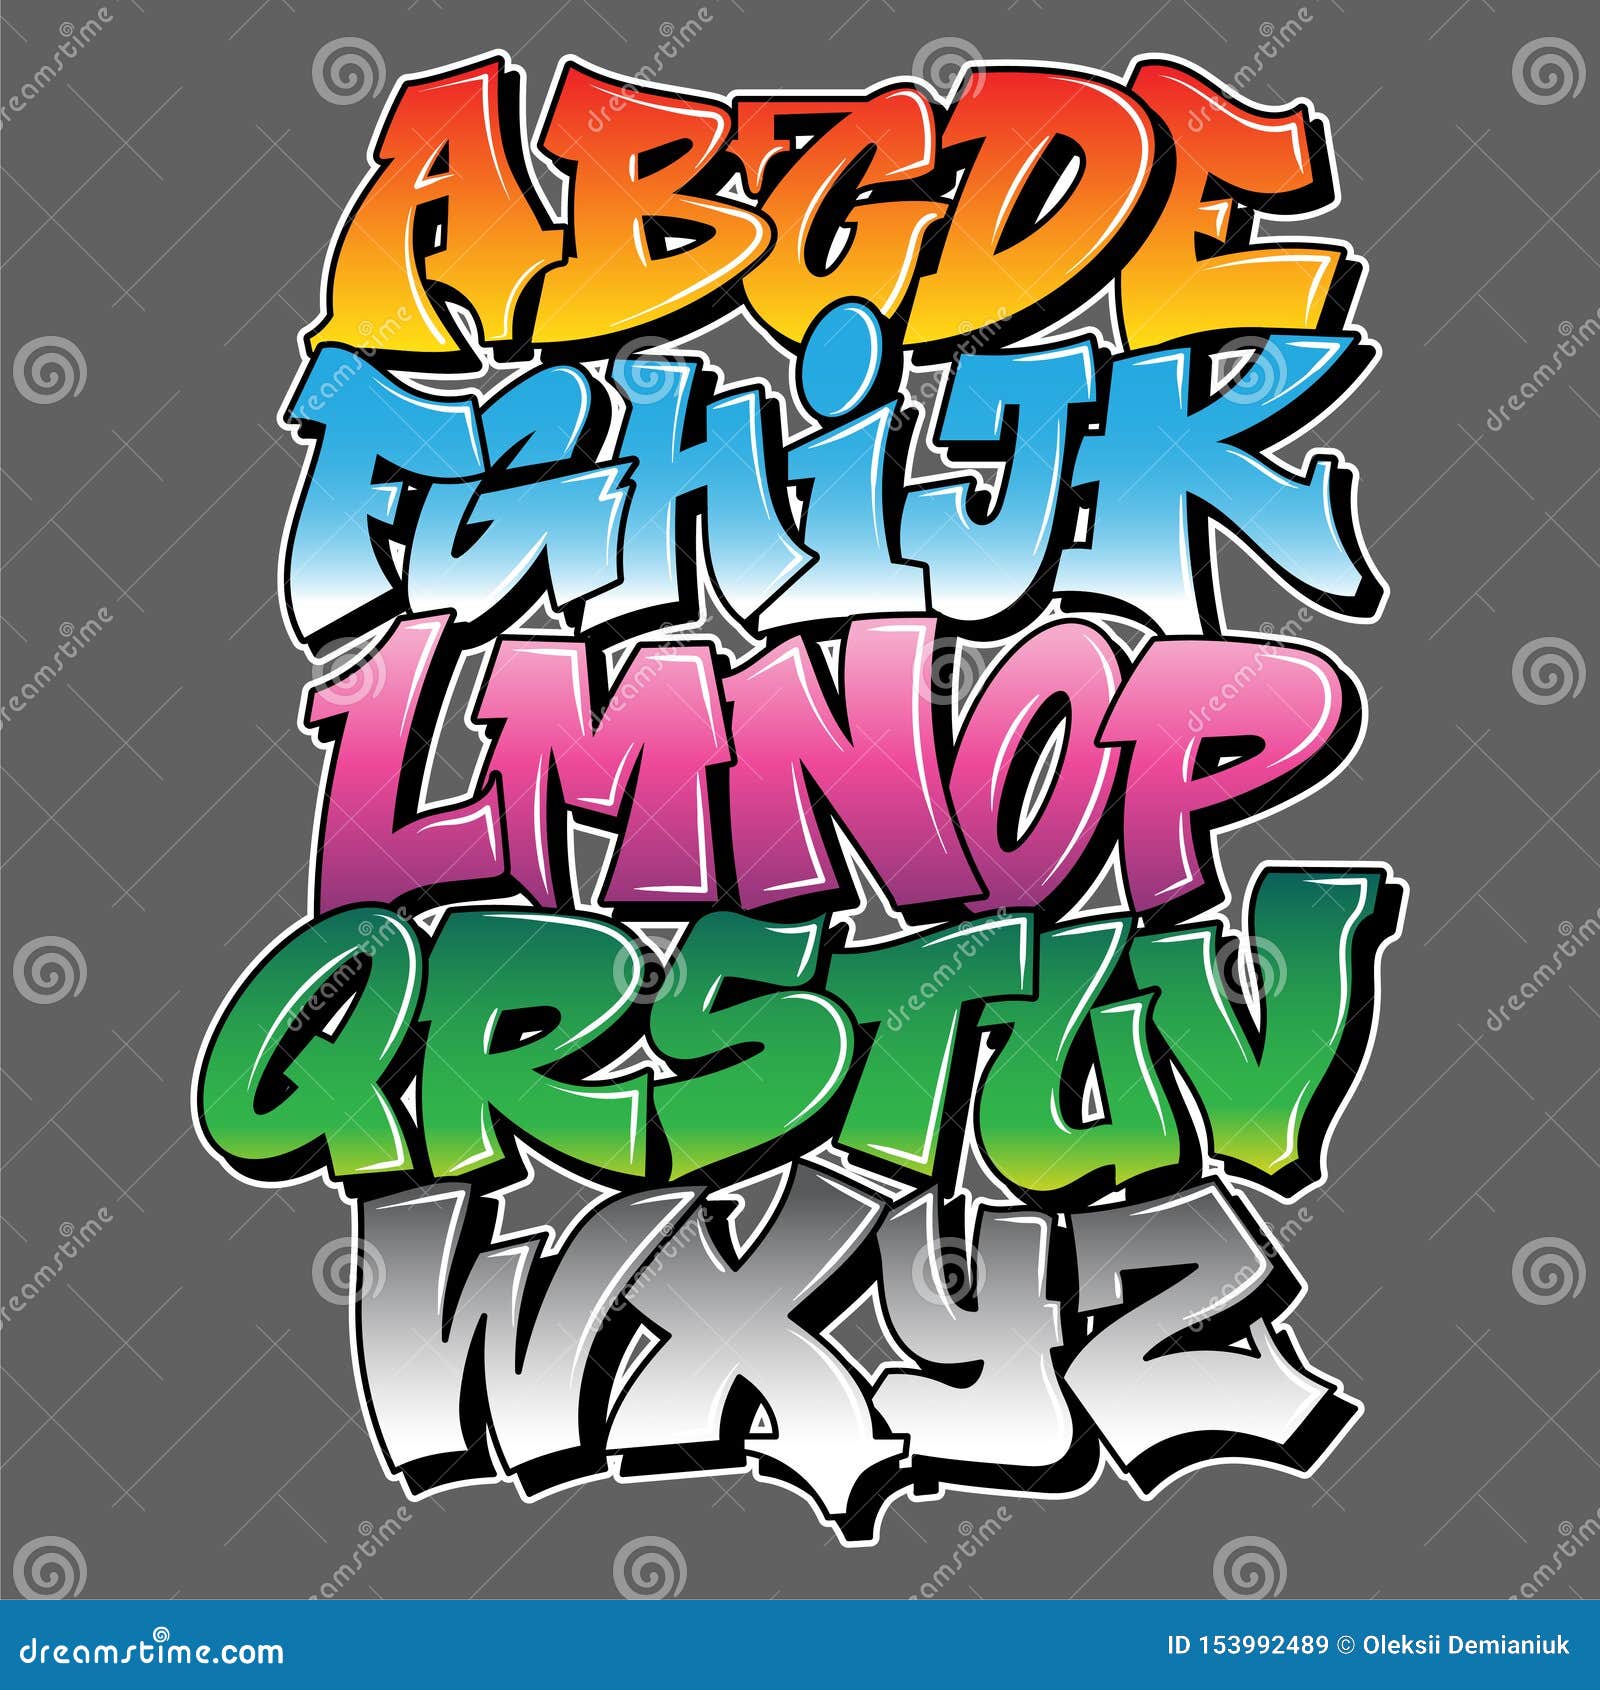 graffiti style lettering text 